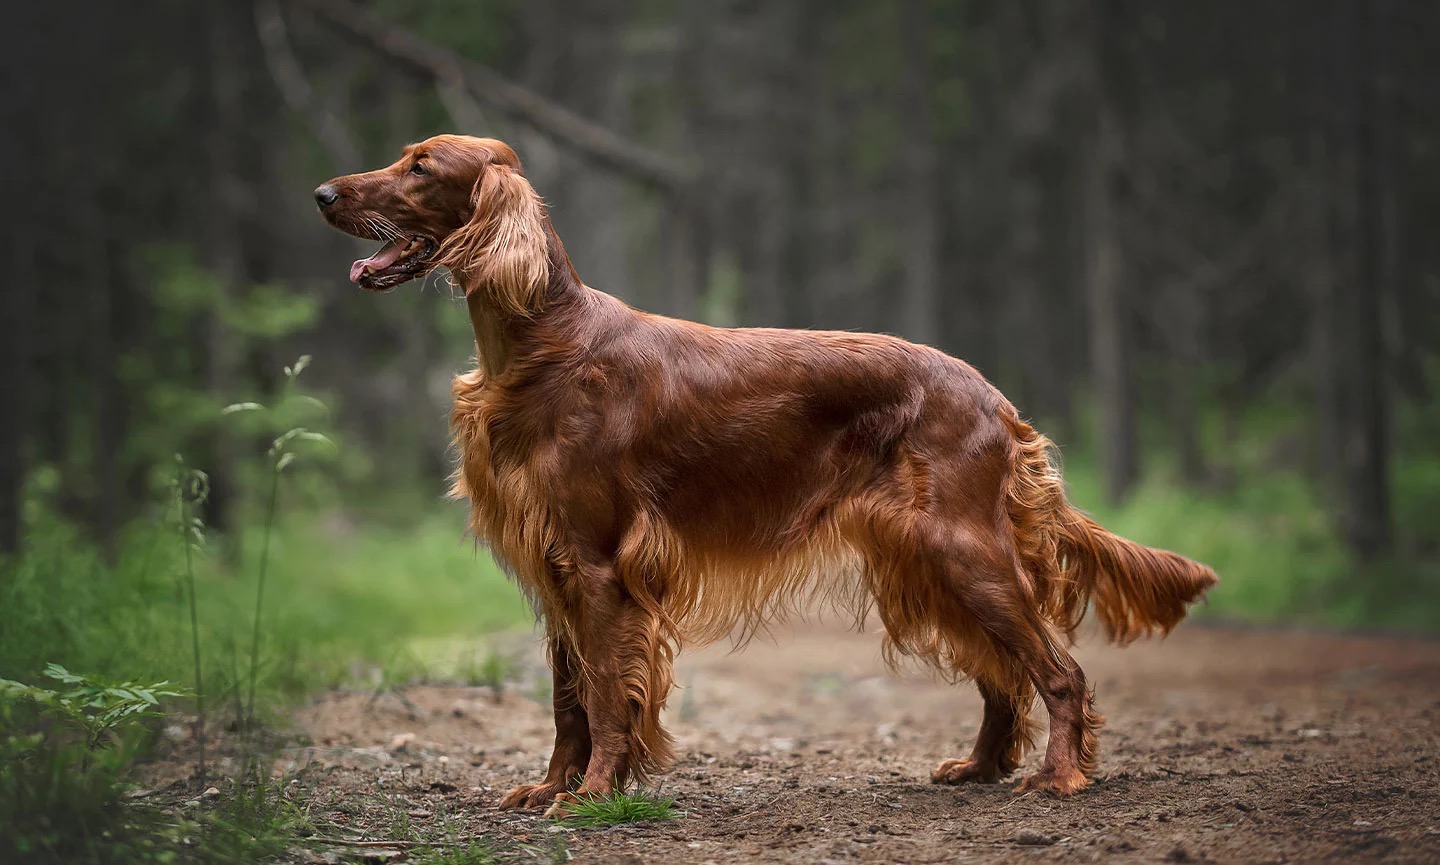 This 🐕 Dog Breeds Quiz May Be a Liiiittle Challenging, But Let’s See If You Can Score 15/20 Irish Setter